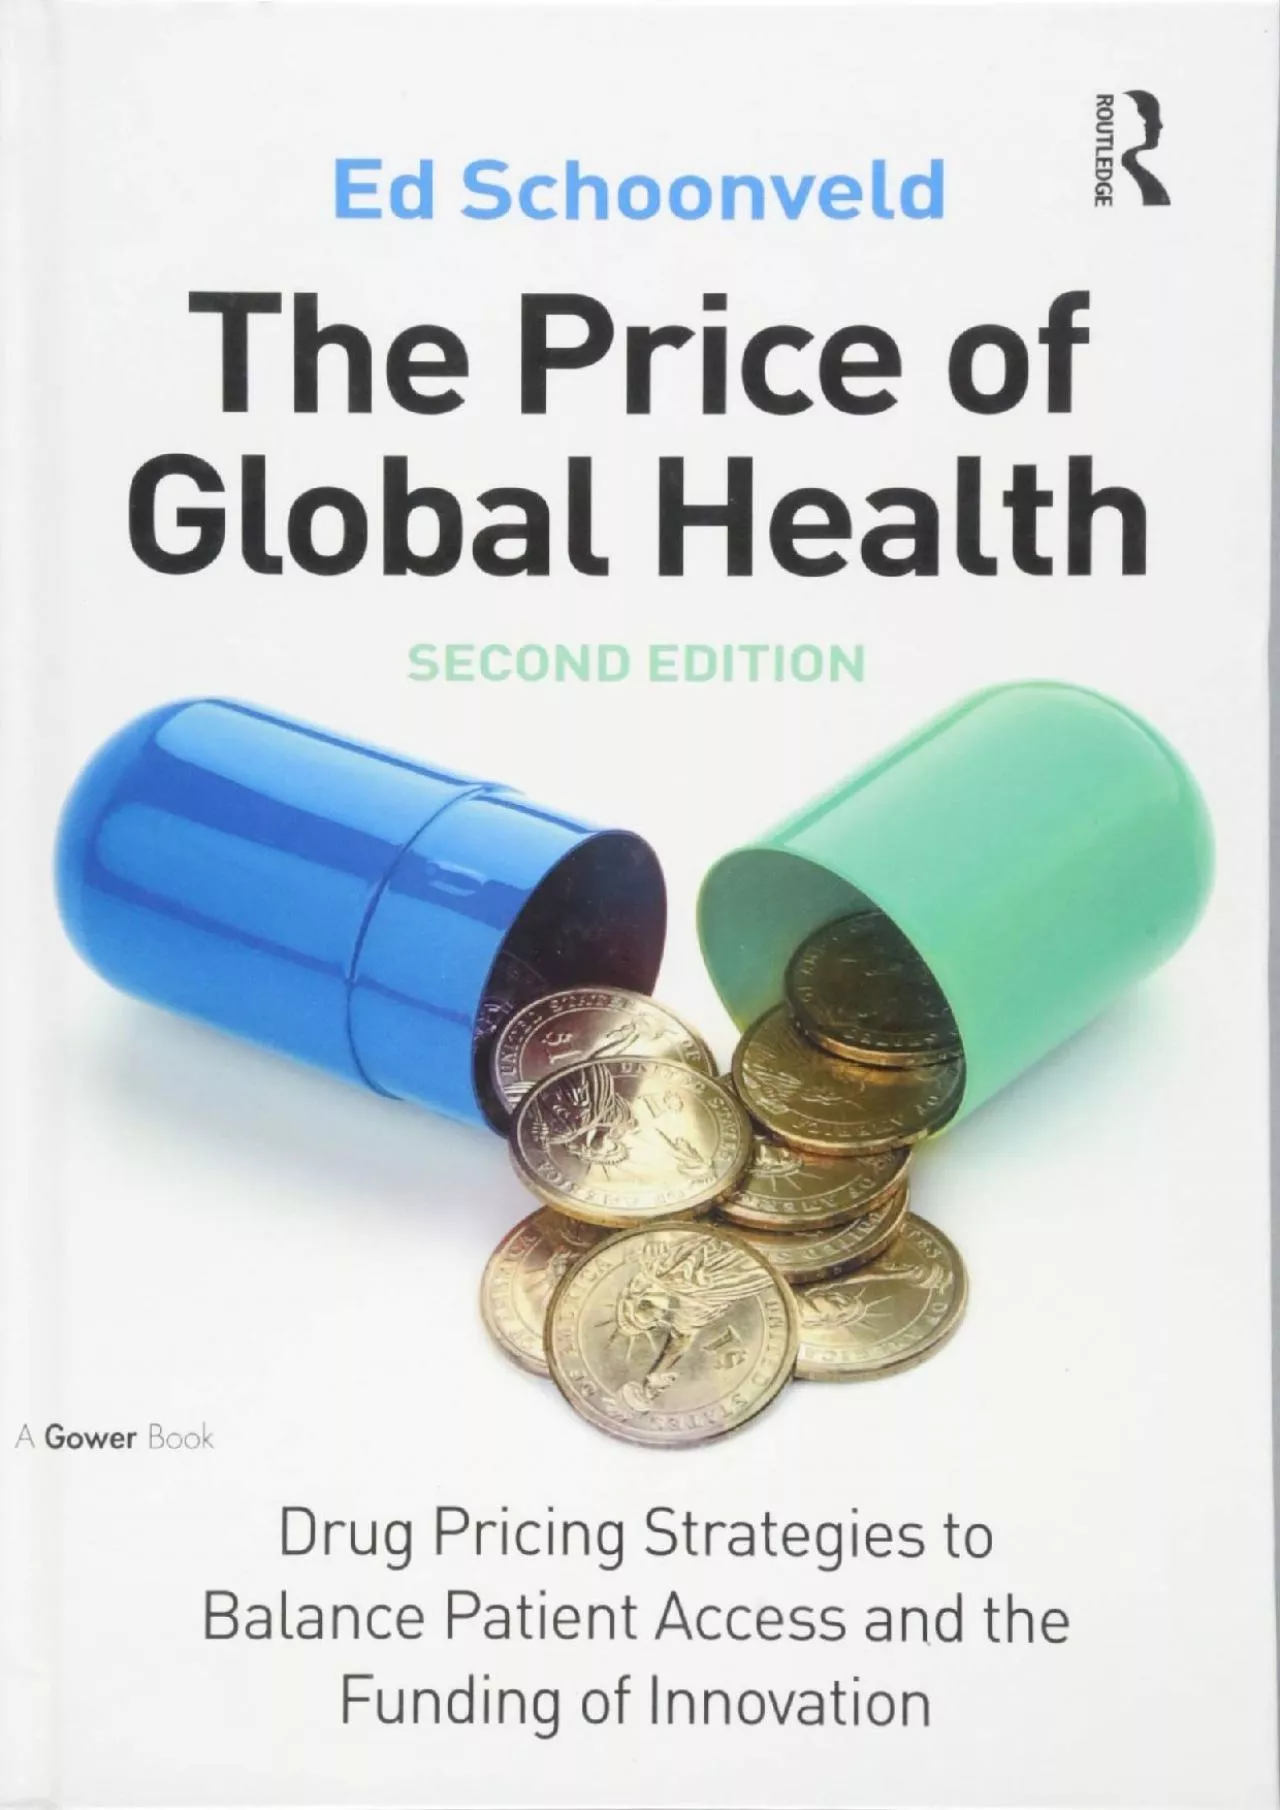 (DOWNLOAD)-The Price of Global Health: Drug Pricing Strategies to Balance Patient Access